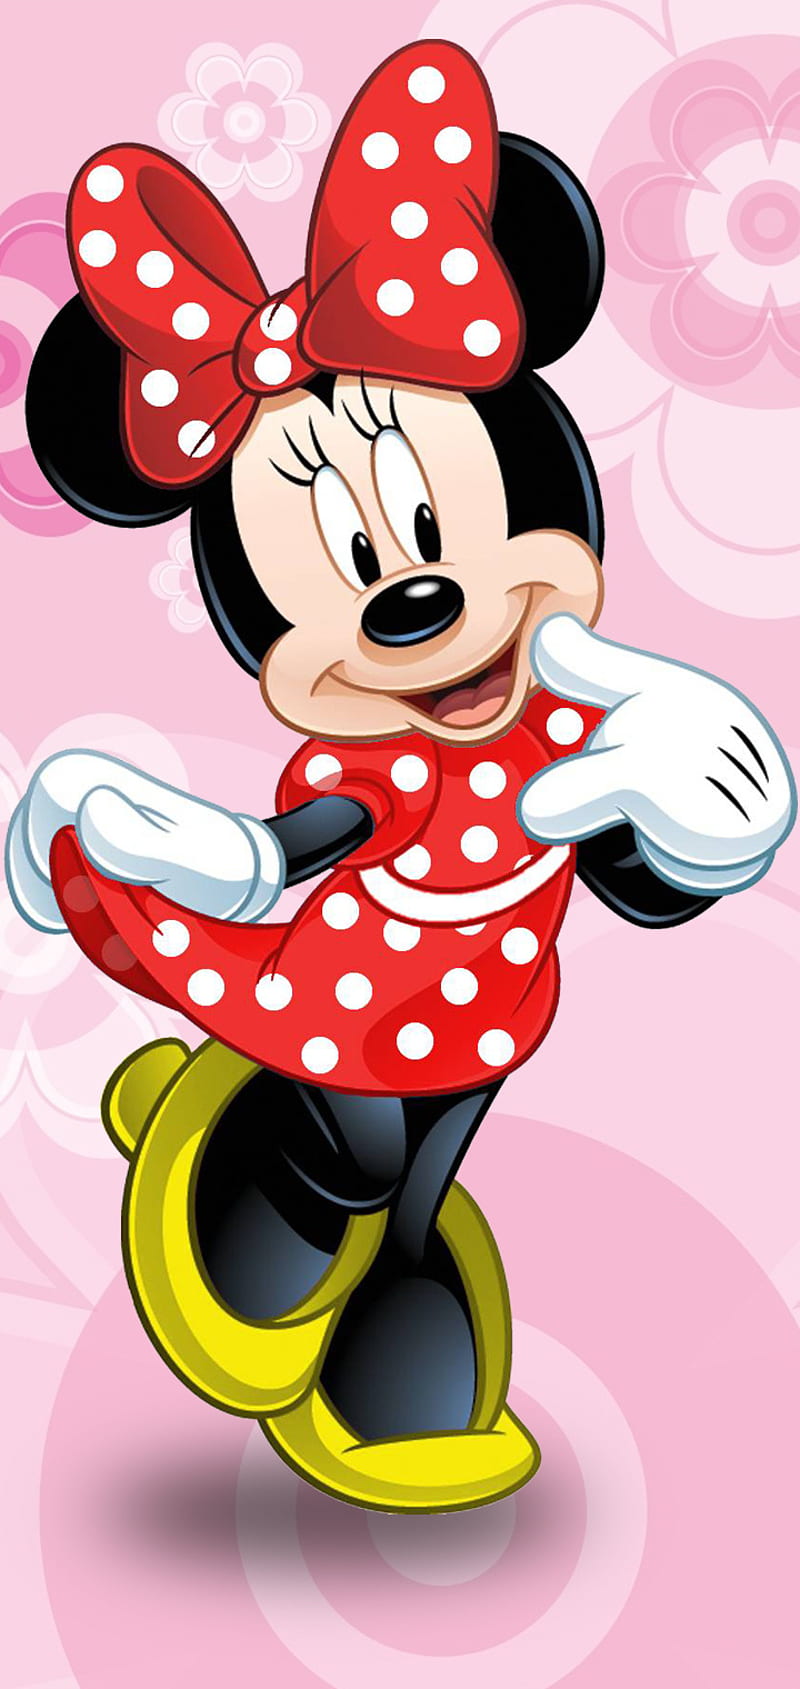 York Wallcoverings DI1029 Disney Minnie Mouse Dots Wallpaper Red